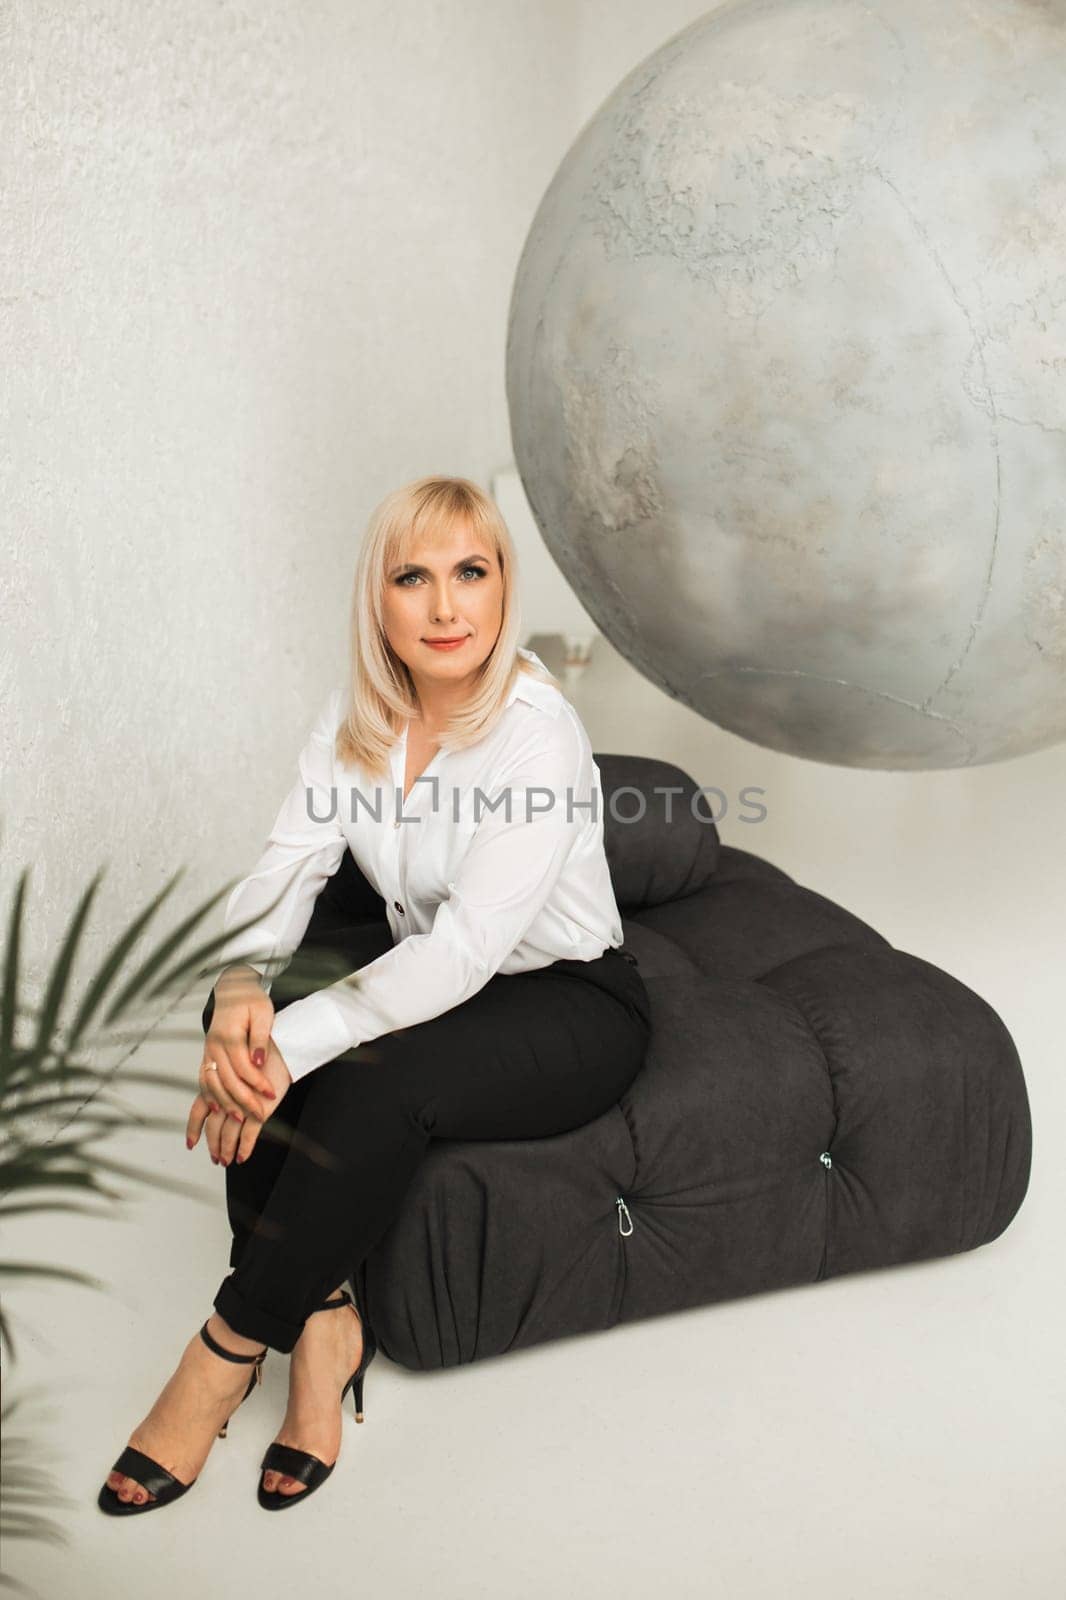 A fashionable woman In a white shirt and black pants poses in the interior.